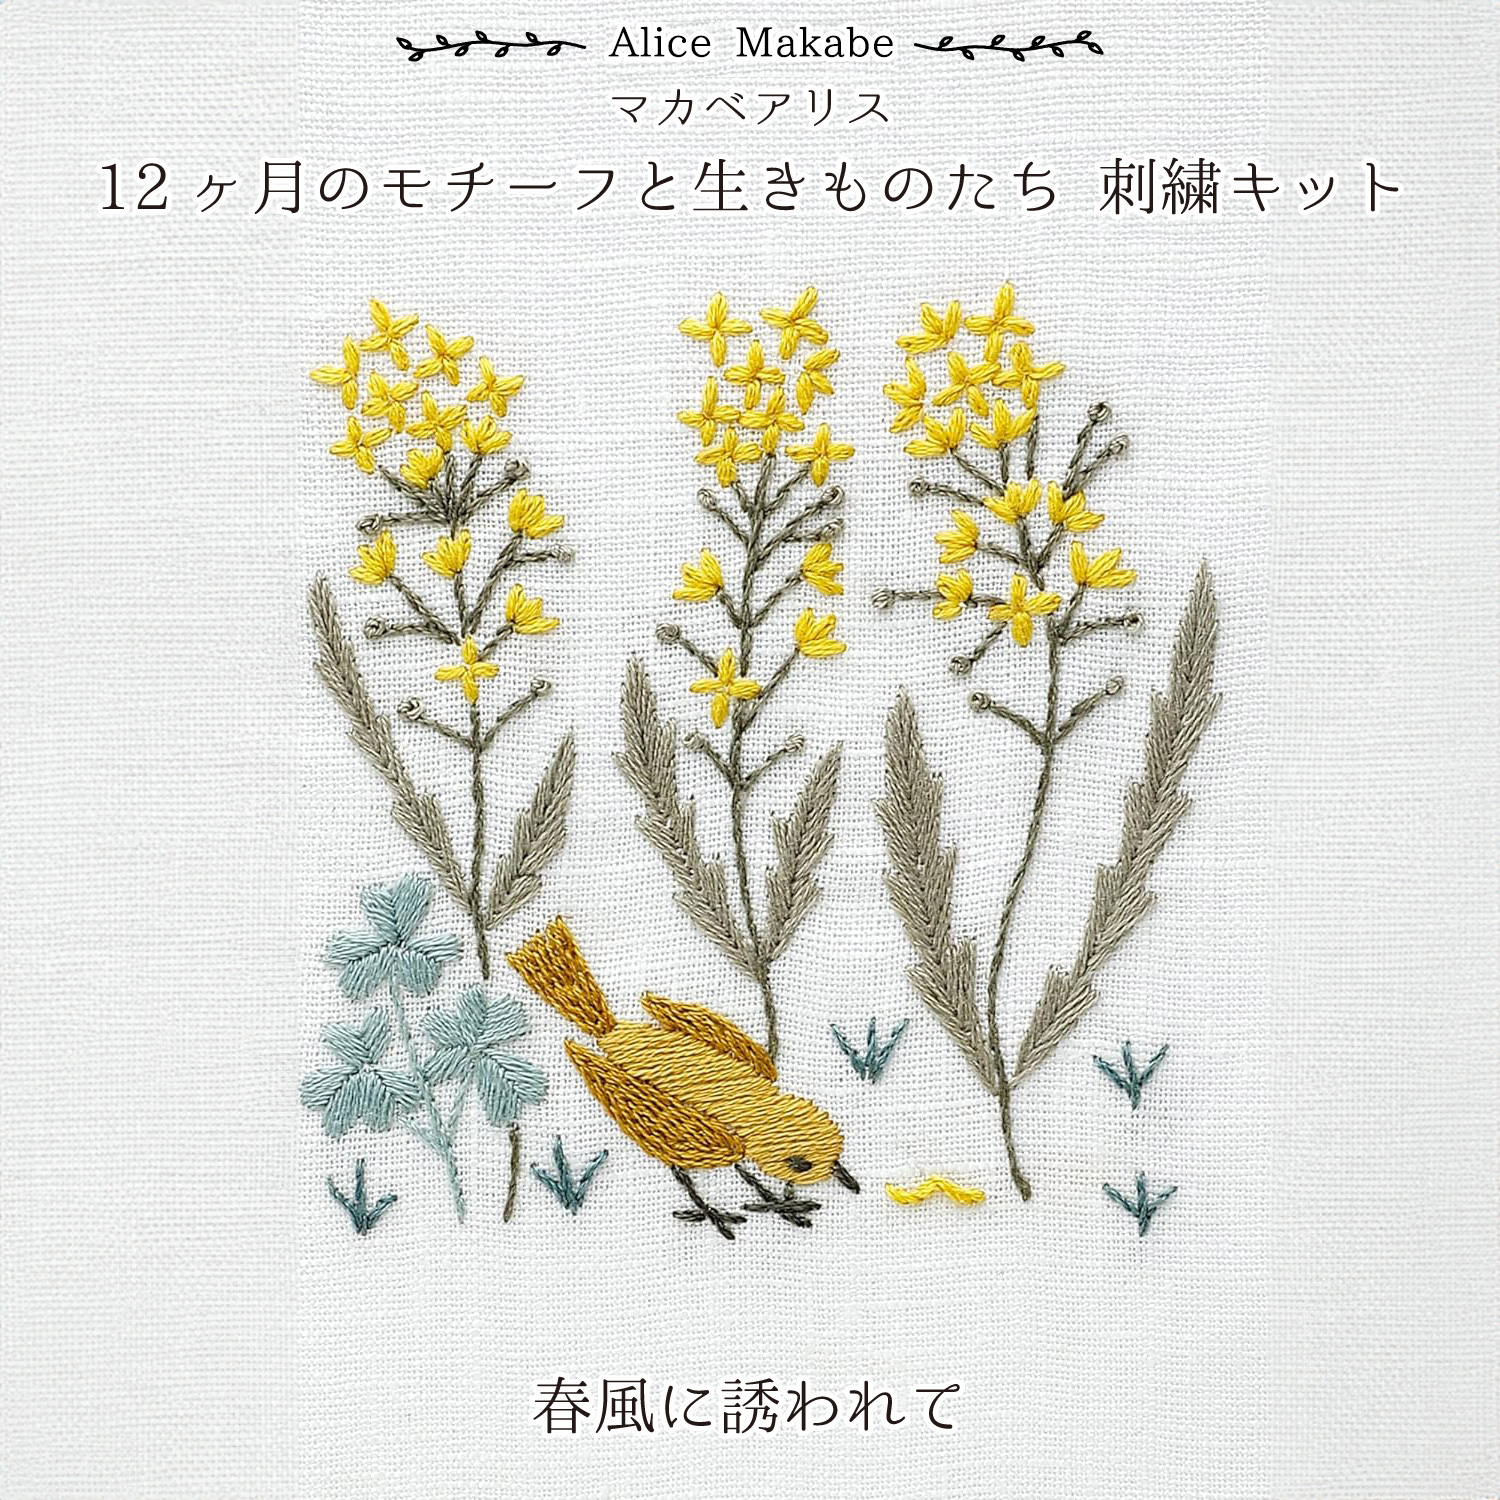 DMC-JPT53 Embroidery kit, Alice Makabe, 12 months motif and creatures (bag)